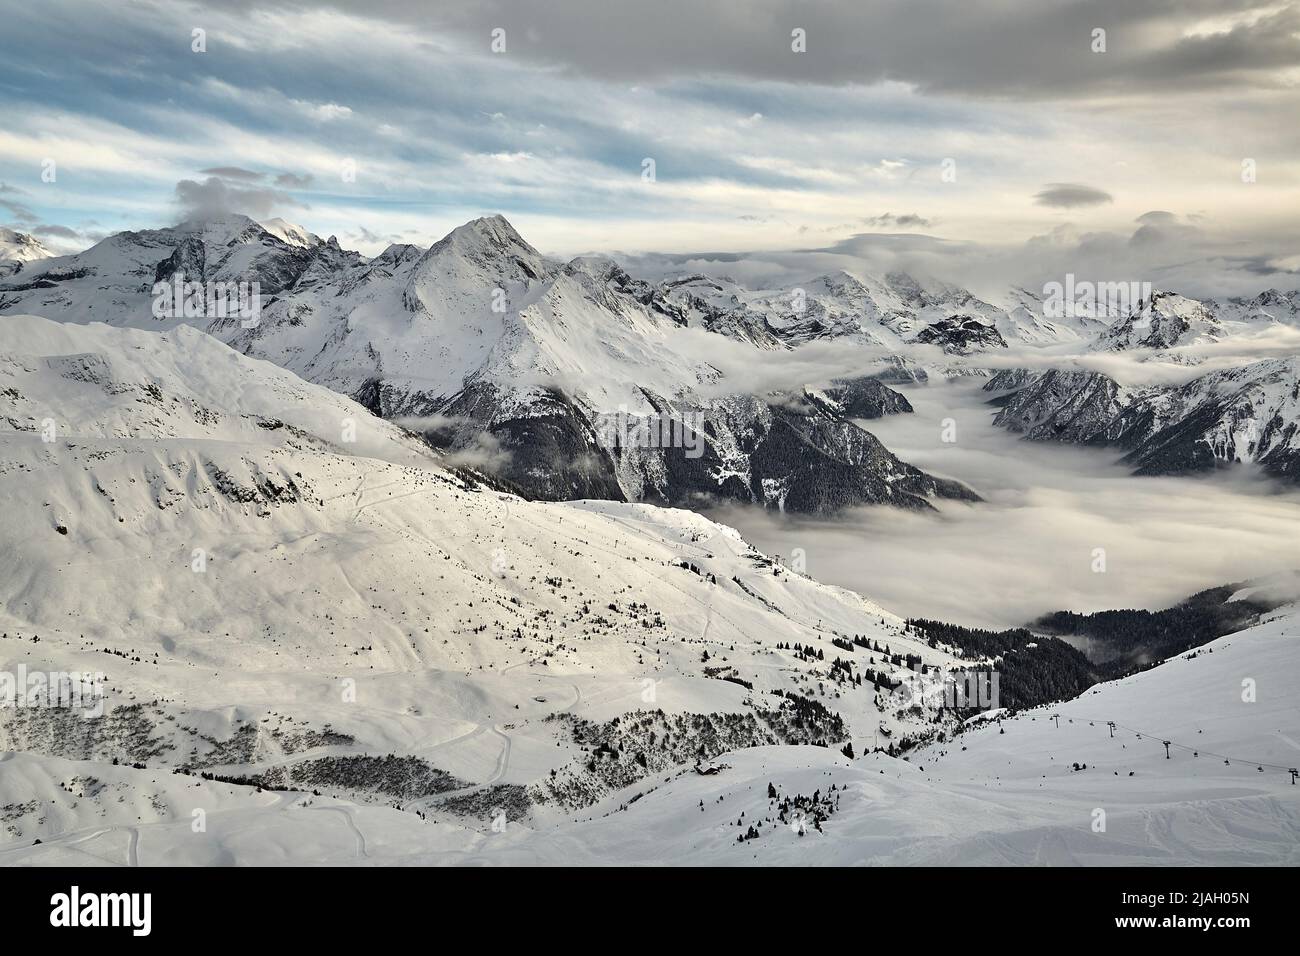 Mountain winter landscape above clouds Stock Photo